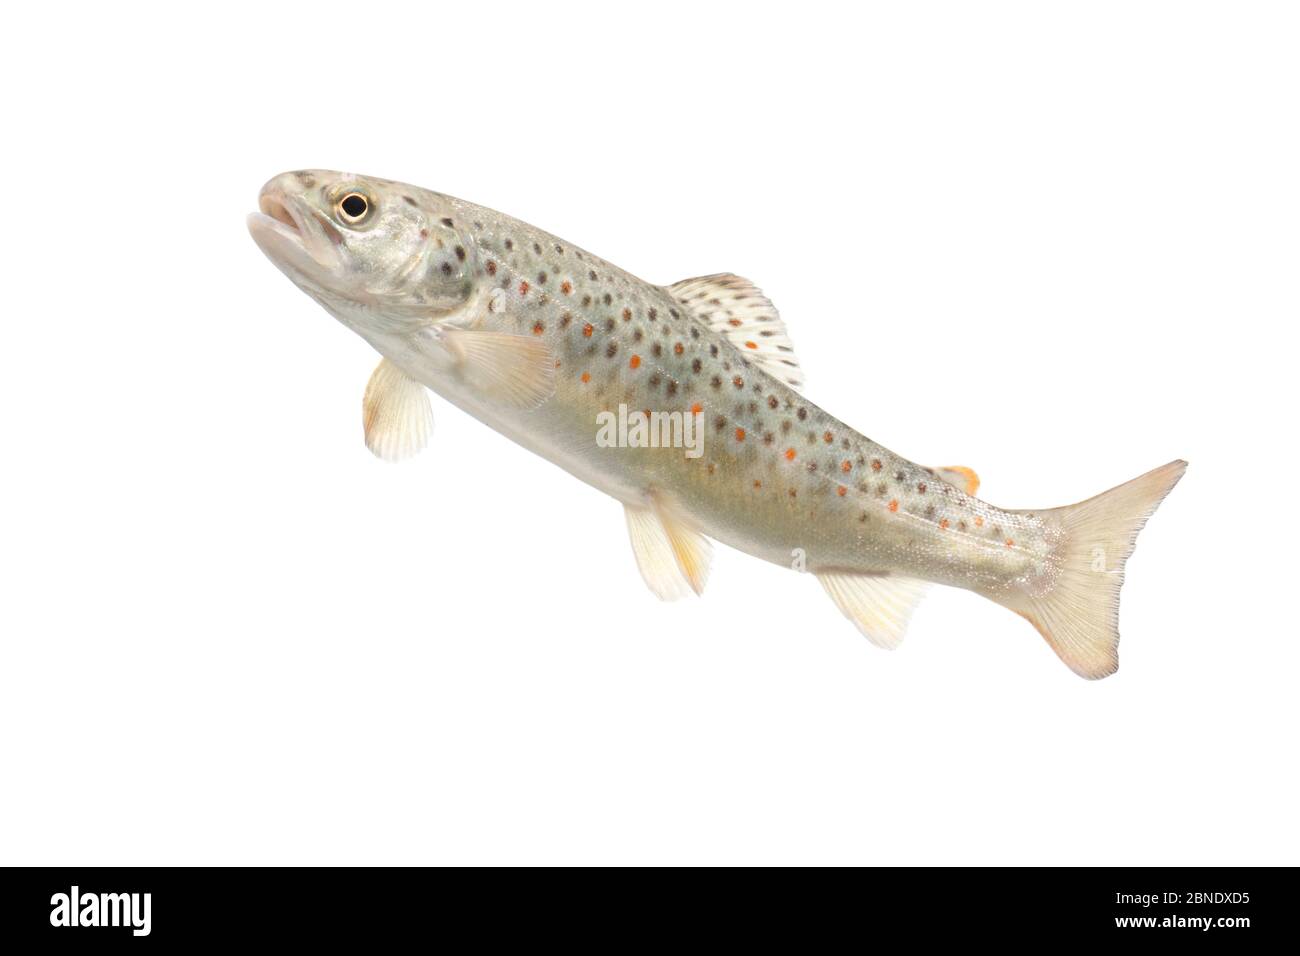 Brown trout (Salmo trutta fario) juvenile, The Netherlands, May, Meetyourneighbours.net project Stock Photo